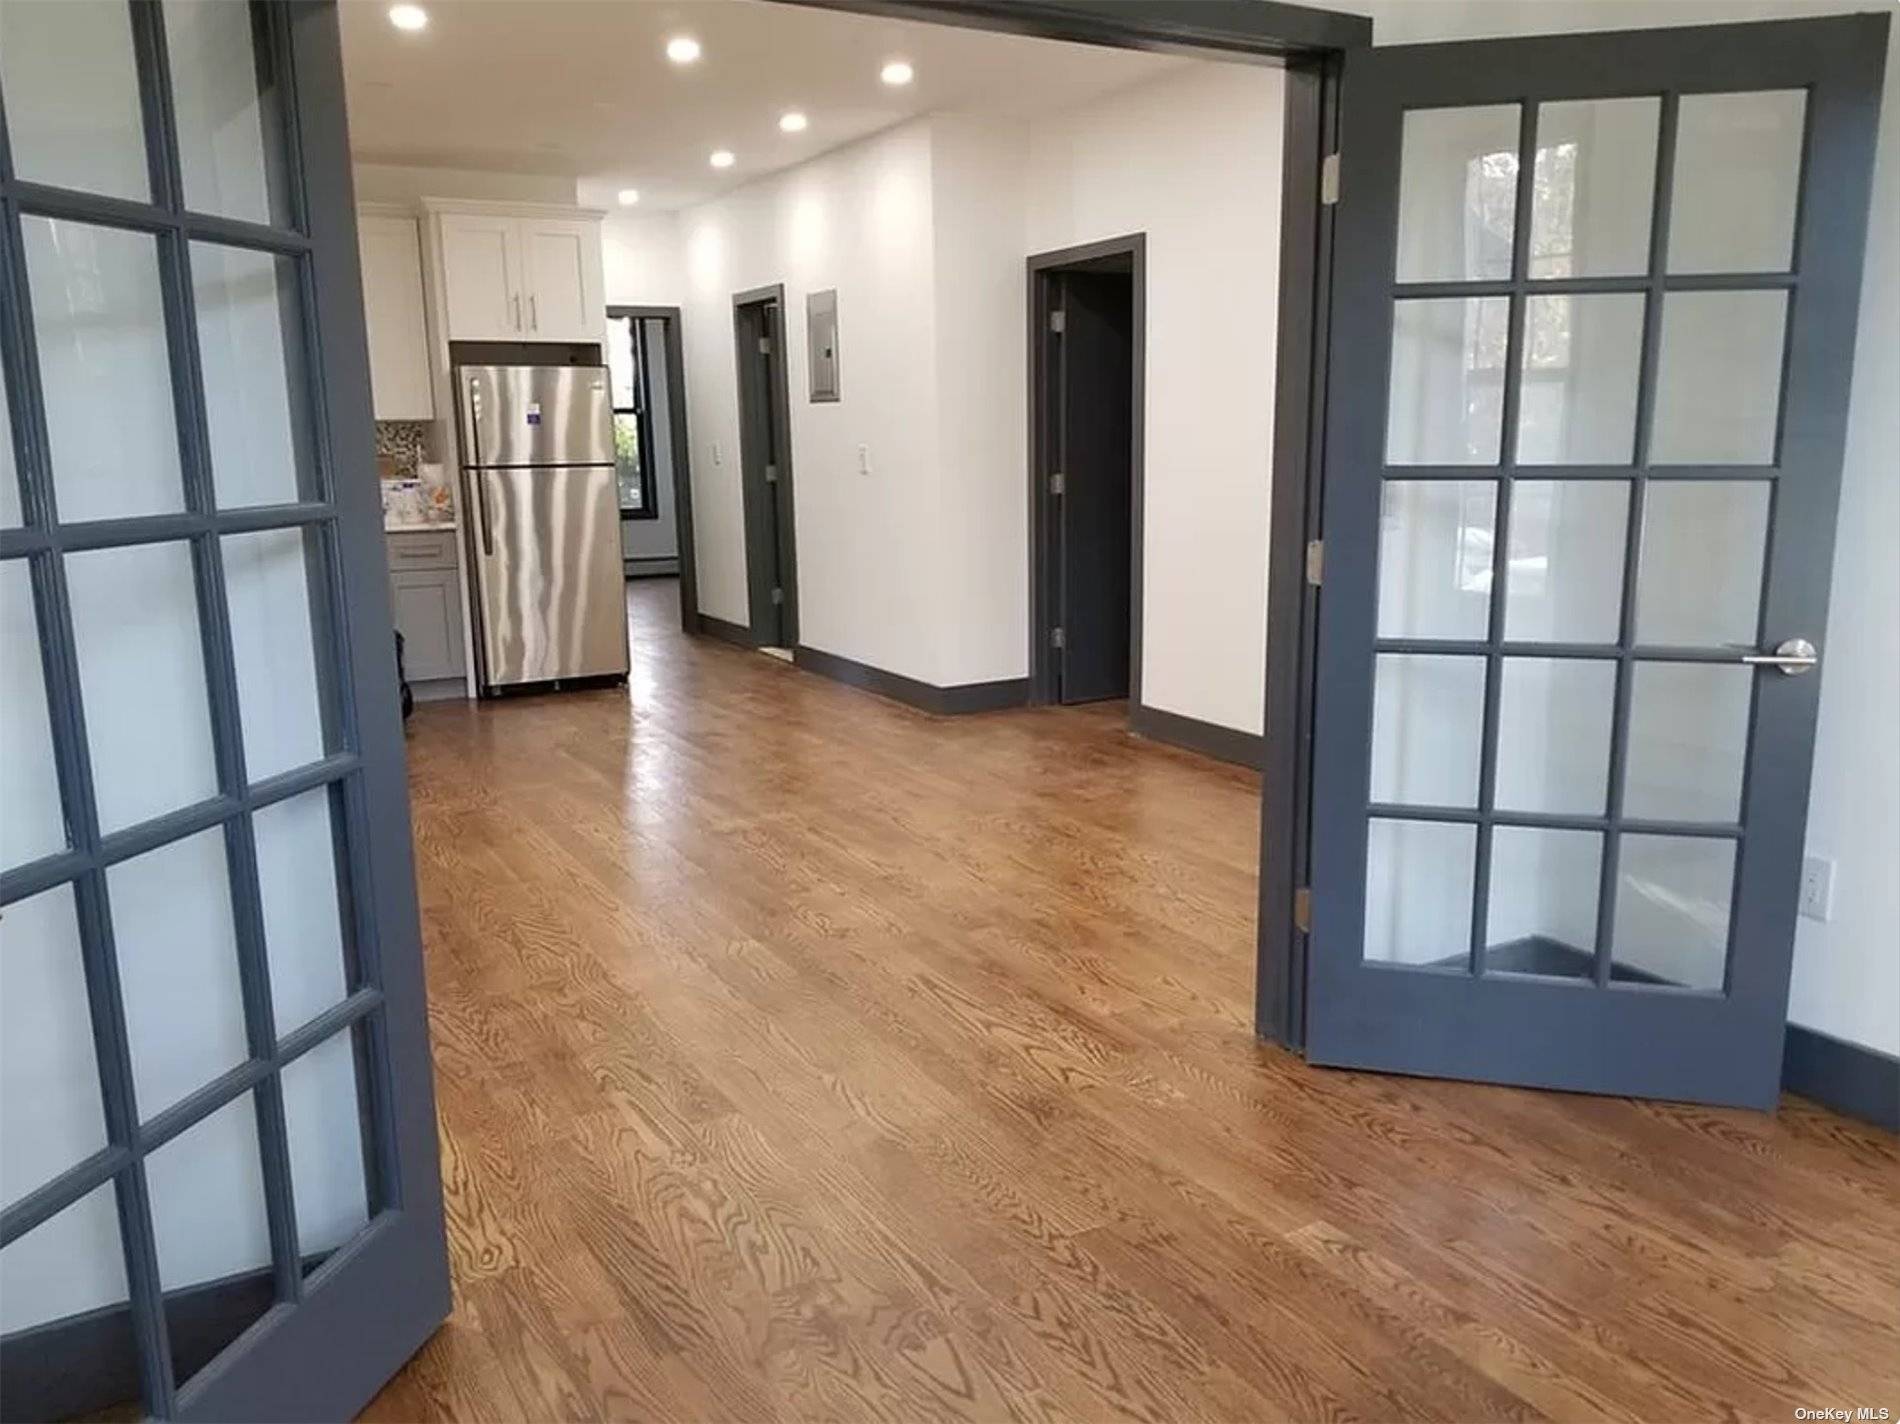 Welcome to this spacious and meticulously renovated 3 bedroom, 2 bathroom duplex in the heart of East New York, Brooklyn.